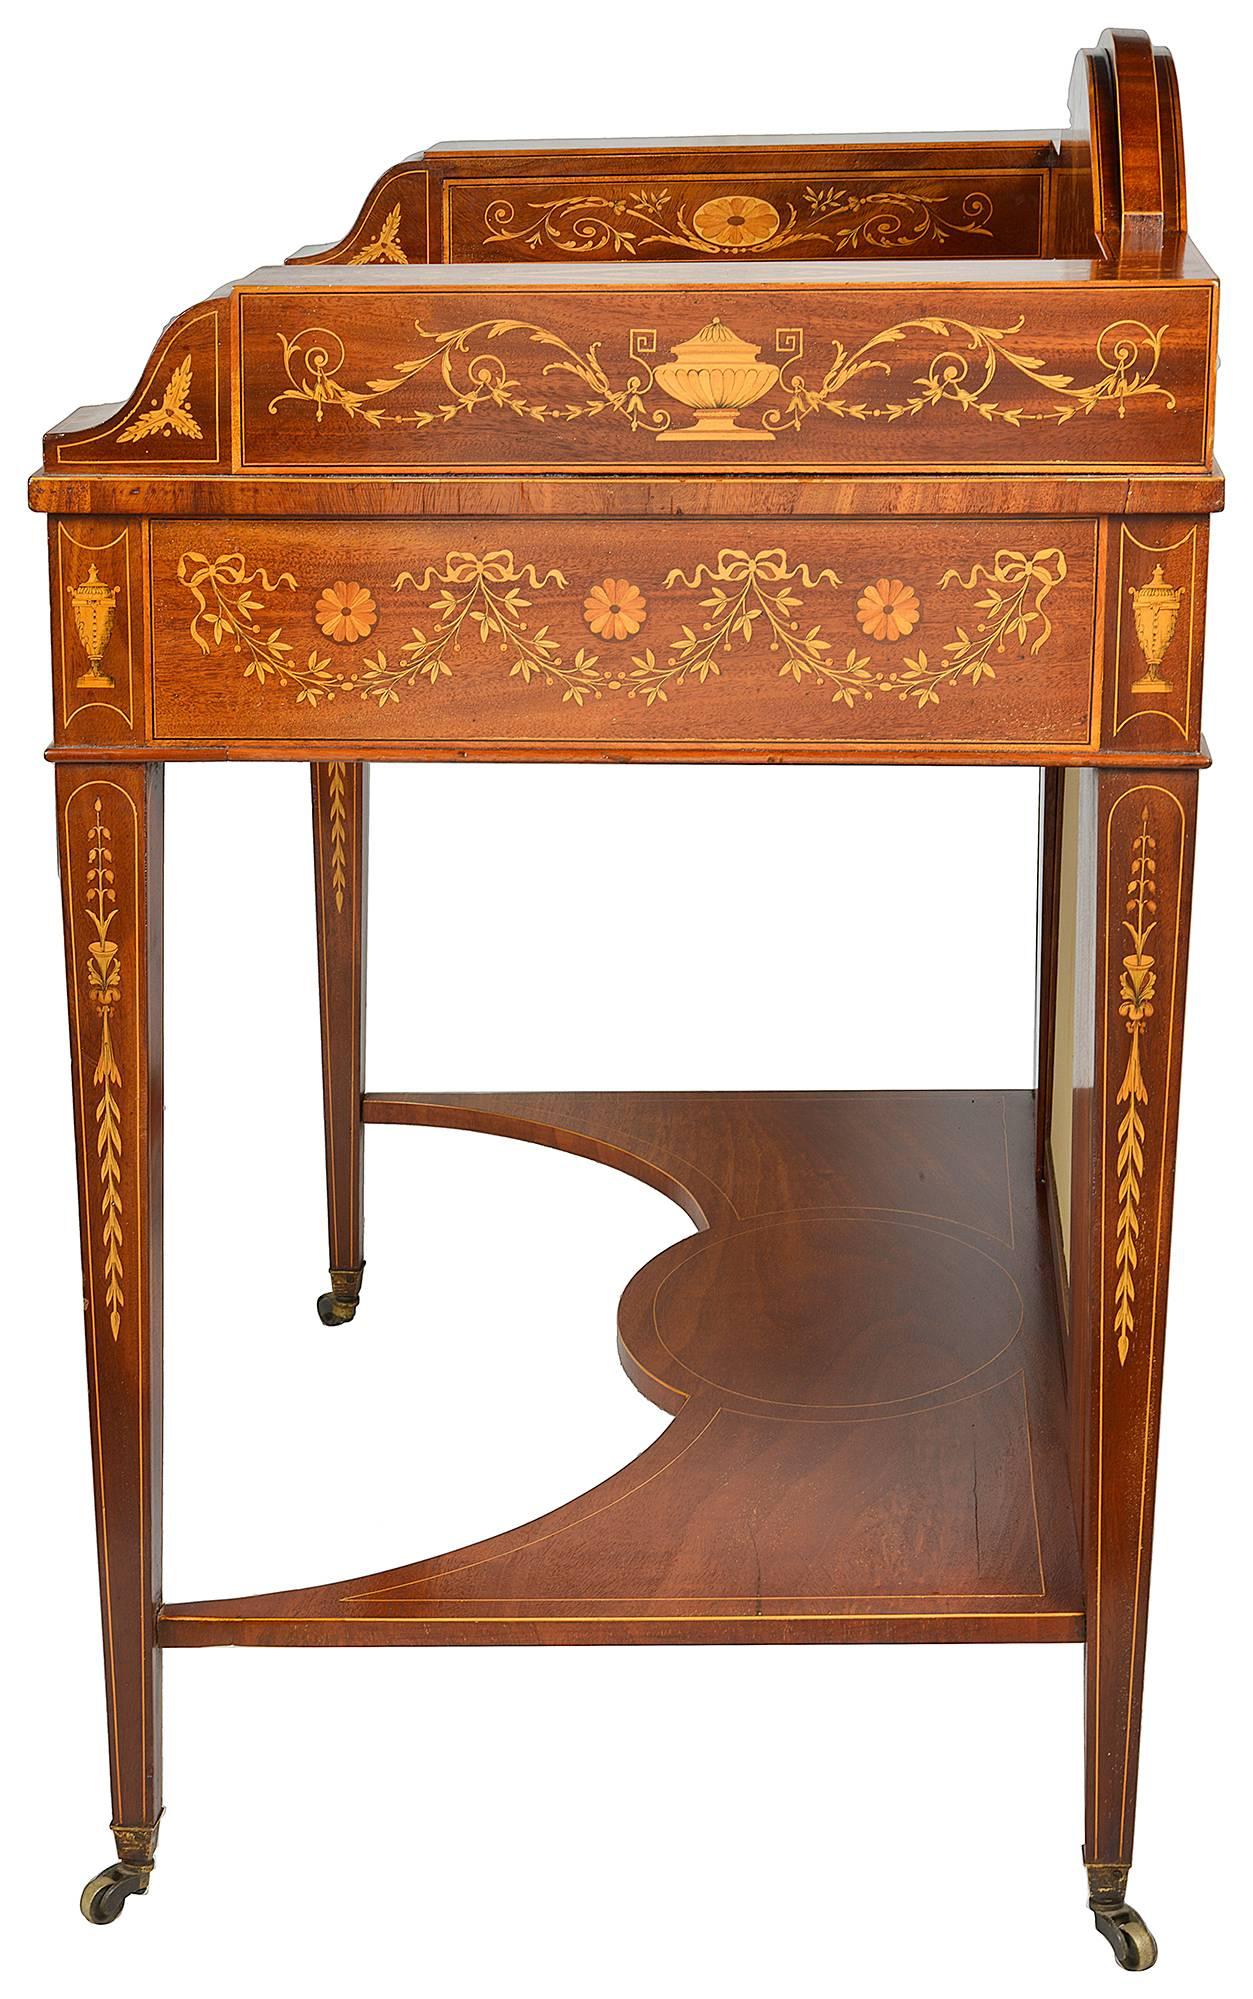 Inlay 19th Century Sheraton Revival Inlaid Desk For Sale